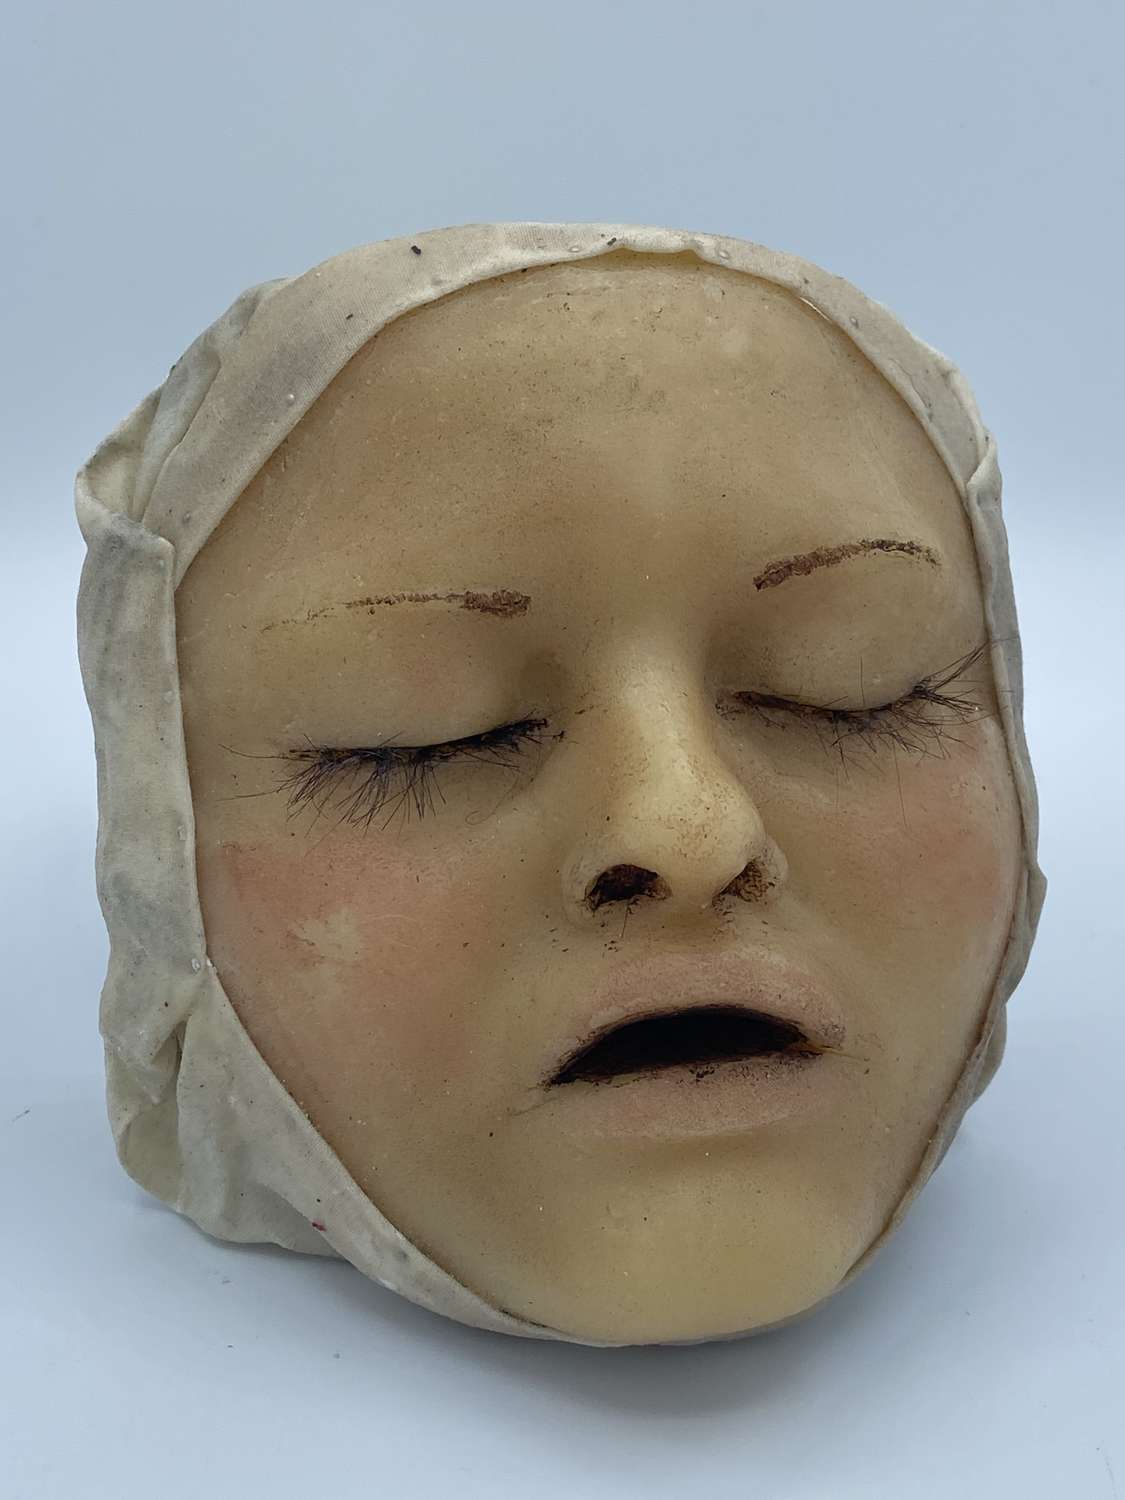 Antique 1890s Paediatric Wax Medical Moulage Death Mask